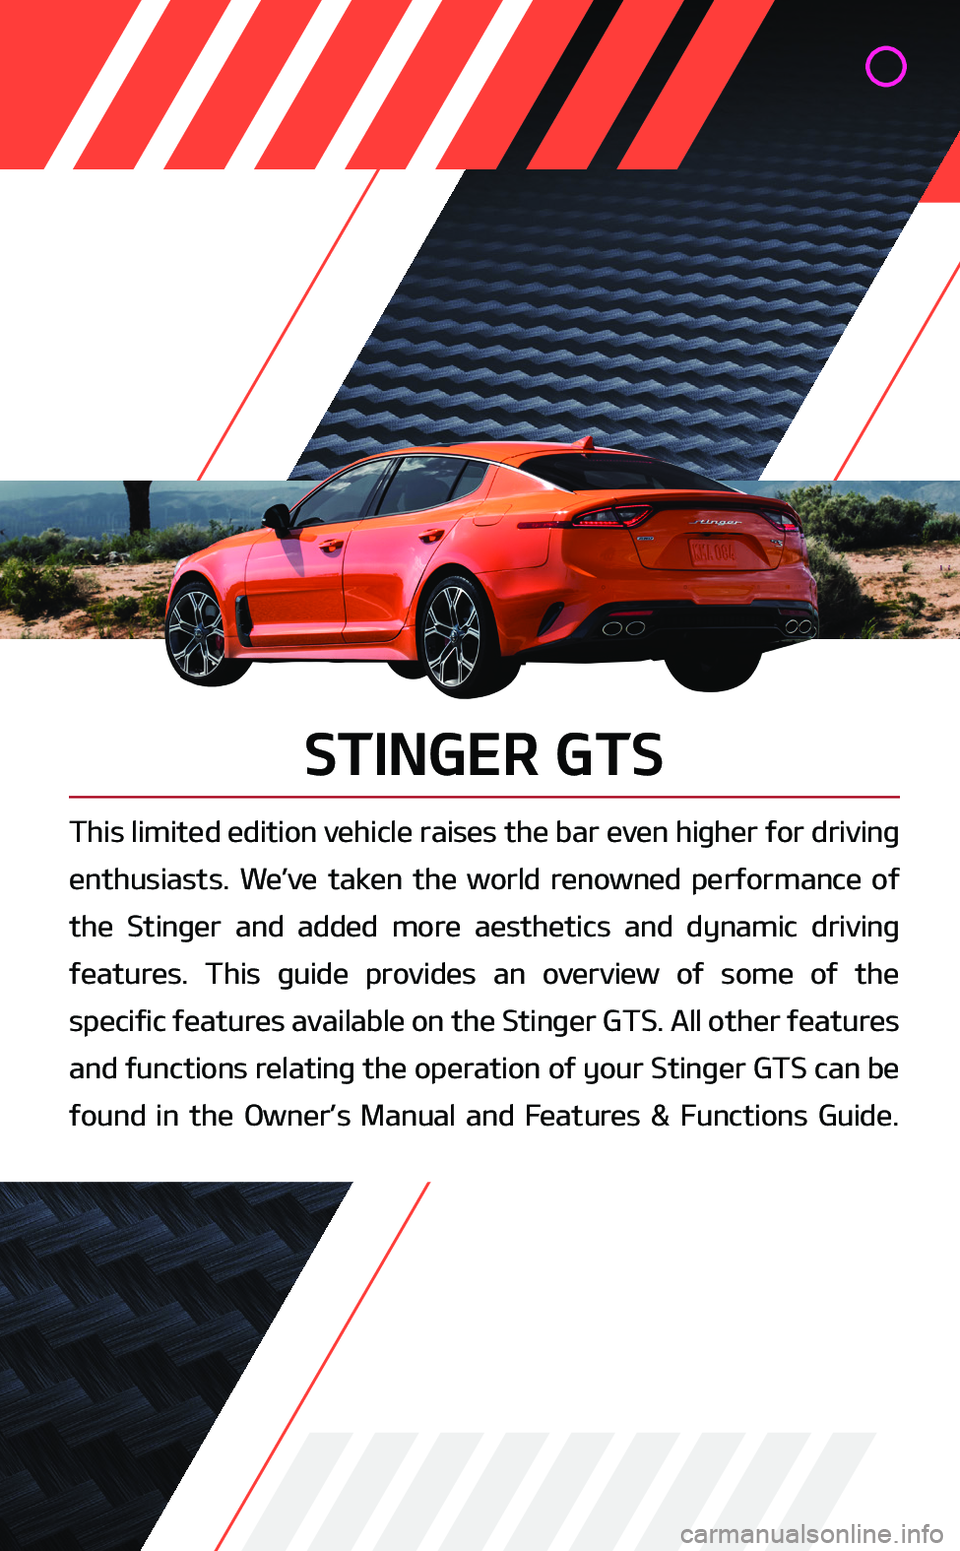 KIA STINGER 2019  Performance Features STINGER GTS
This limited edition vehicle raises the bar even higher for driving 
enthusiasts. We’ve taken the world renowned performance of 
the Stinger and added more aesthetics and dynamic driving